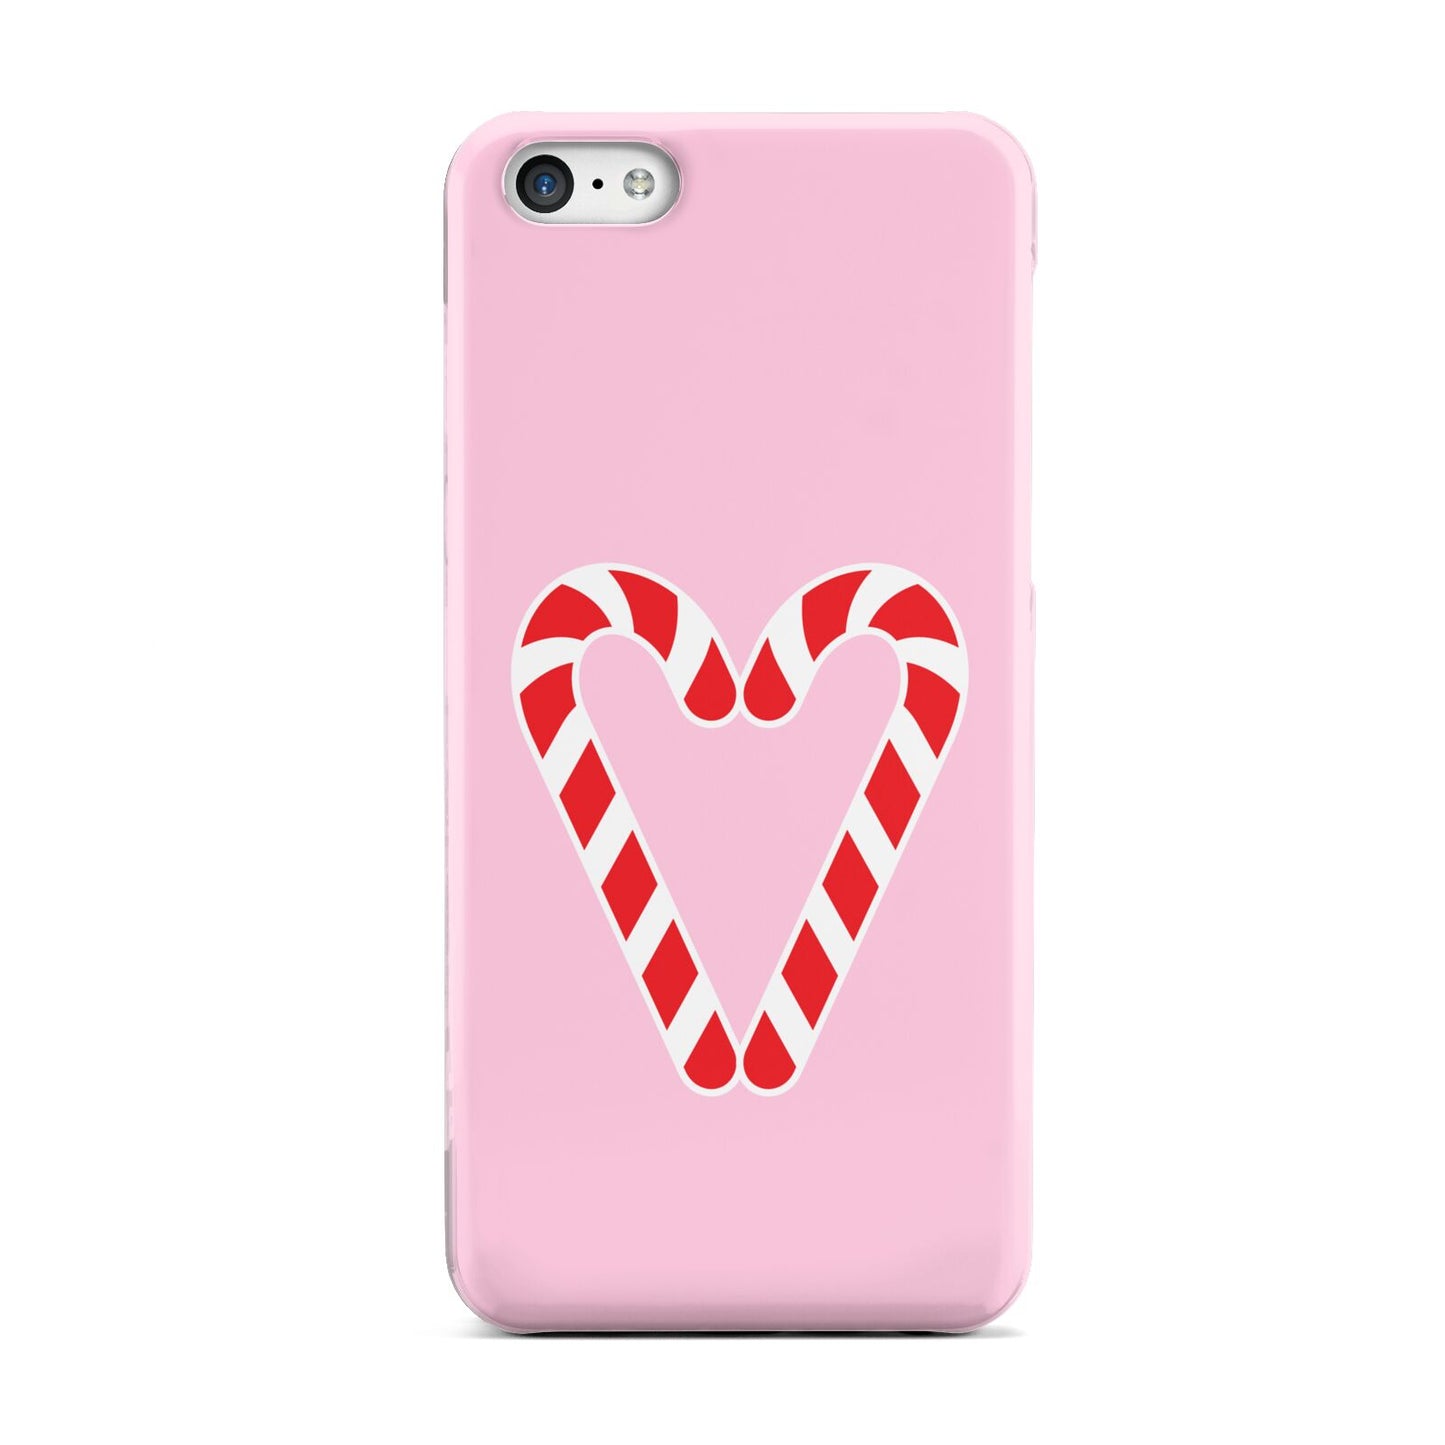 Candy Cane Heart Apple iPhone 5c Case